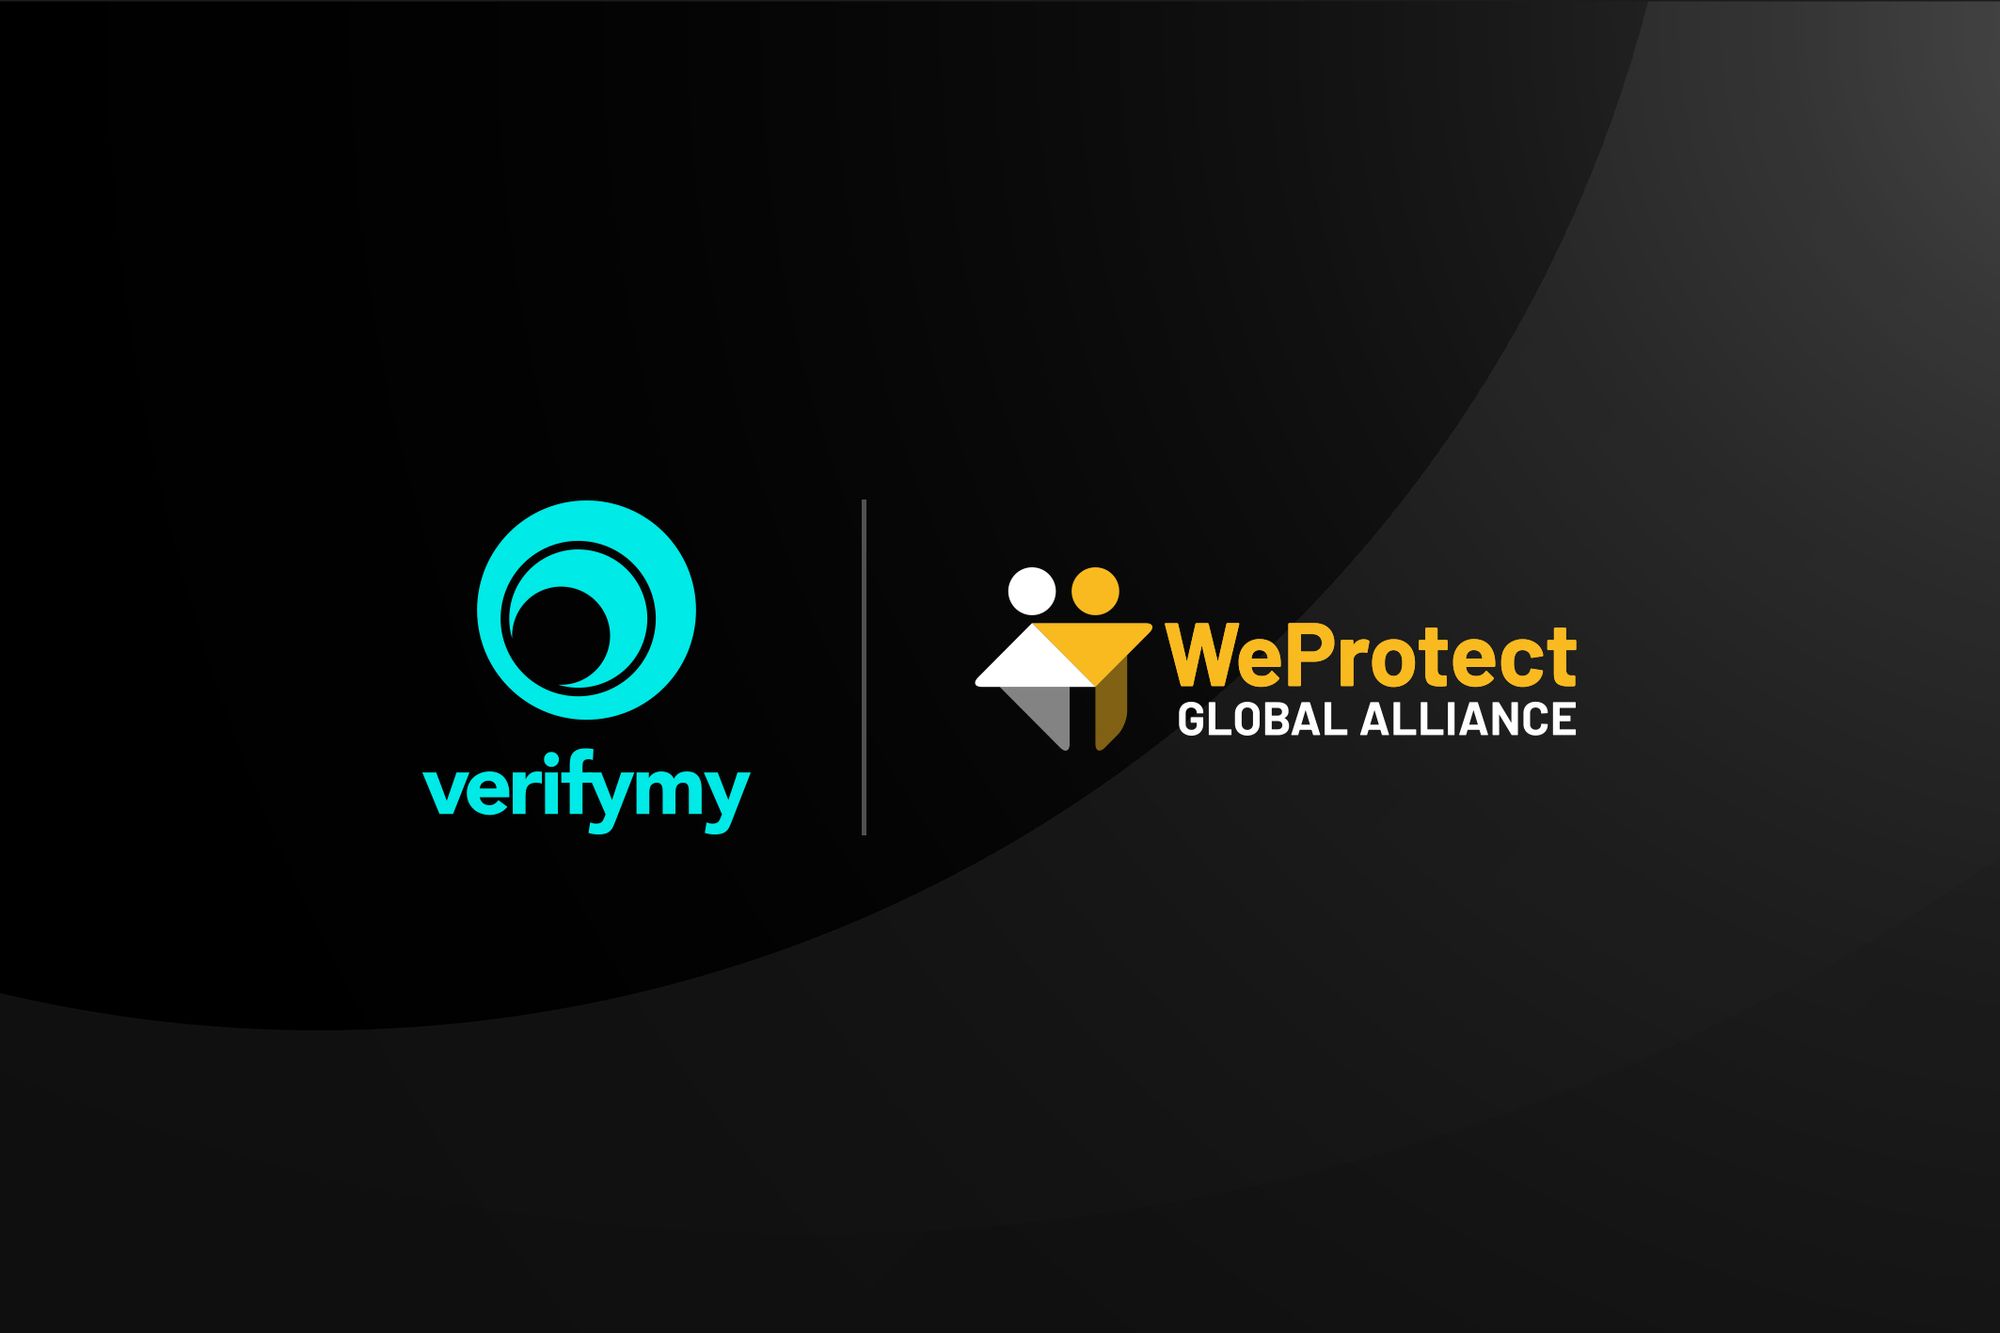 VerifyMy joins WeProtect Global Alliance